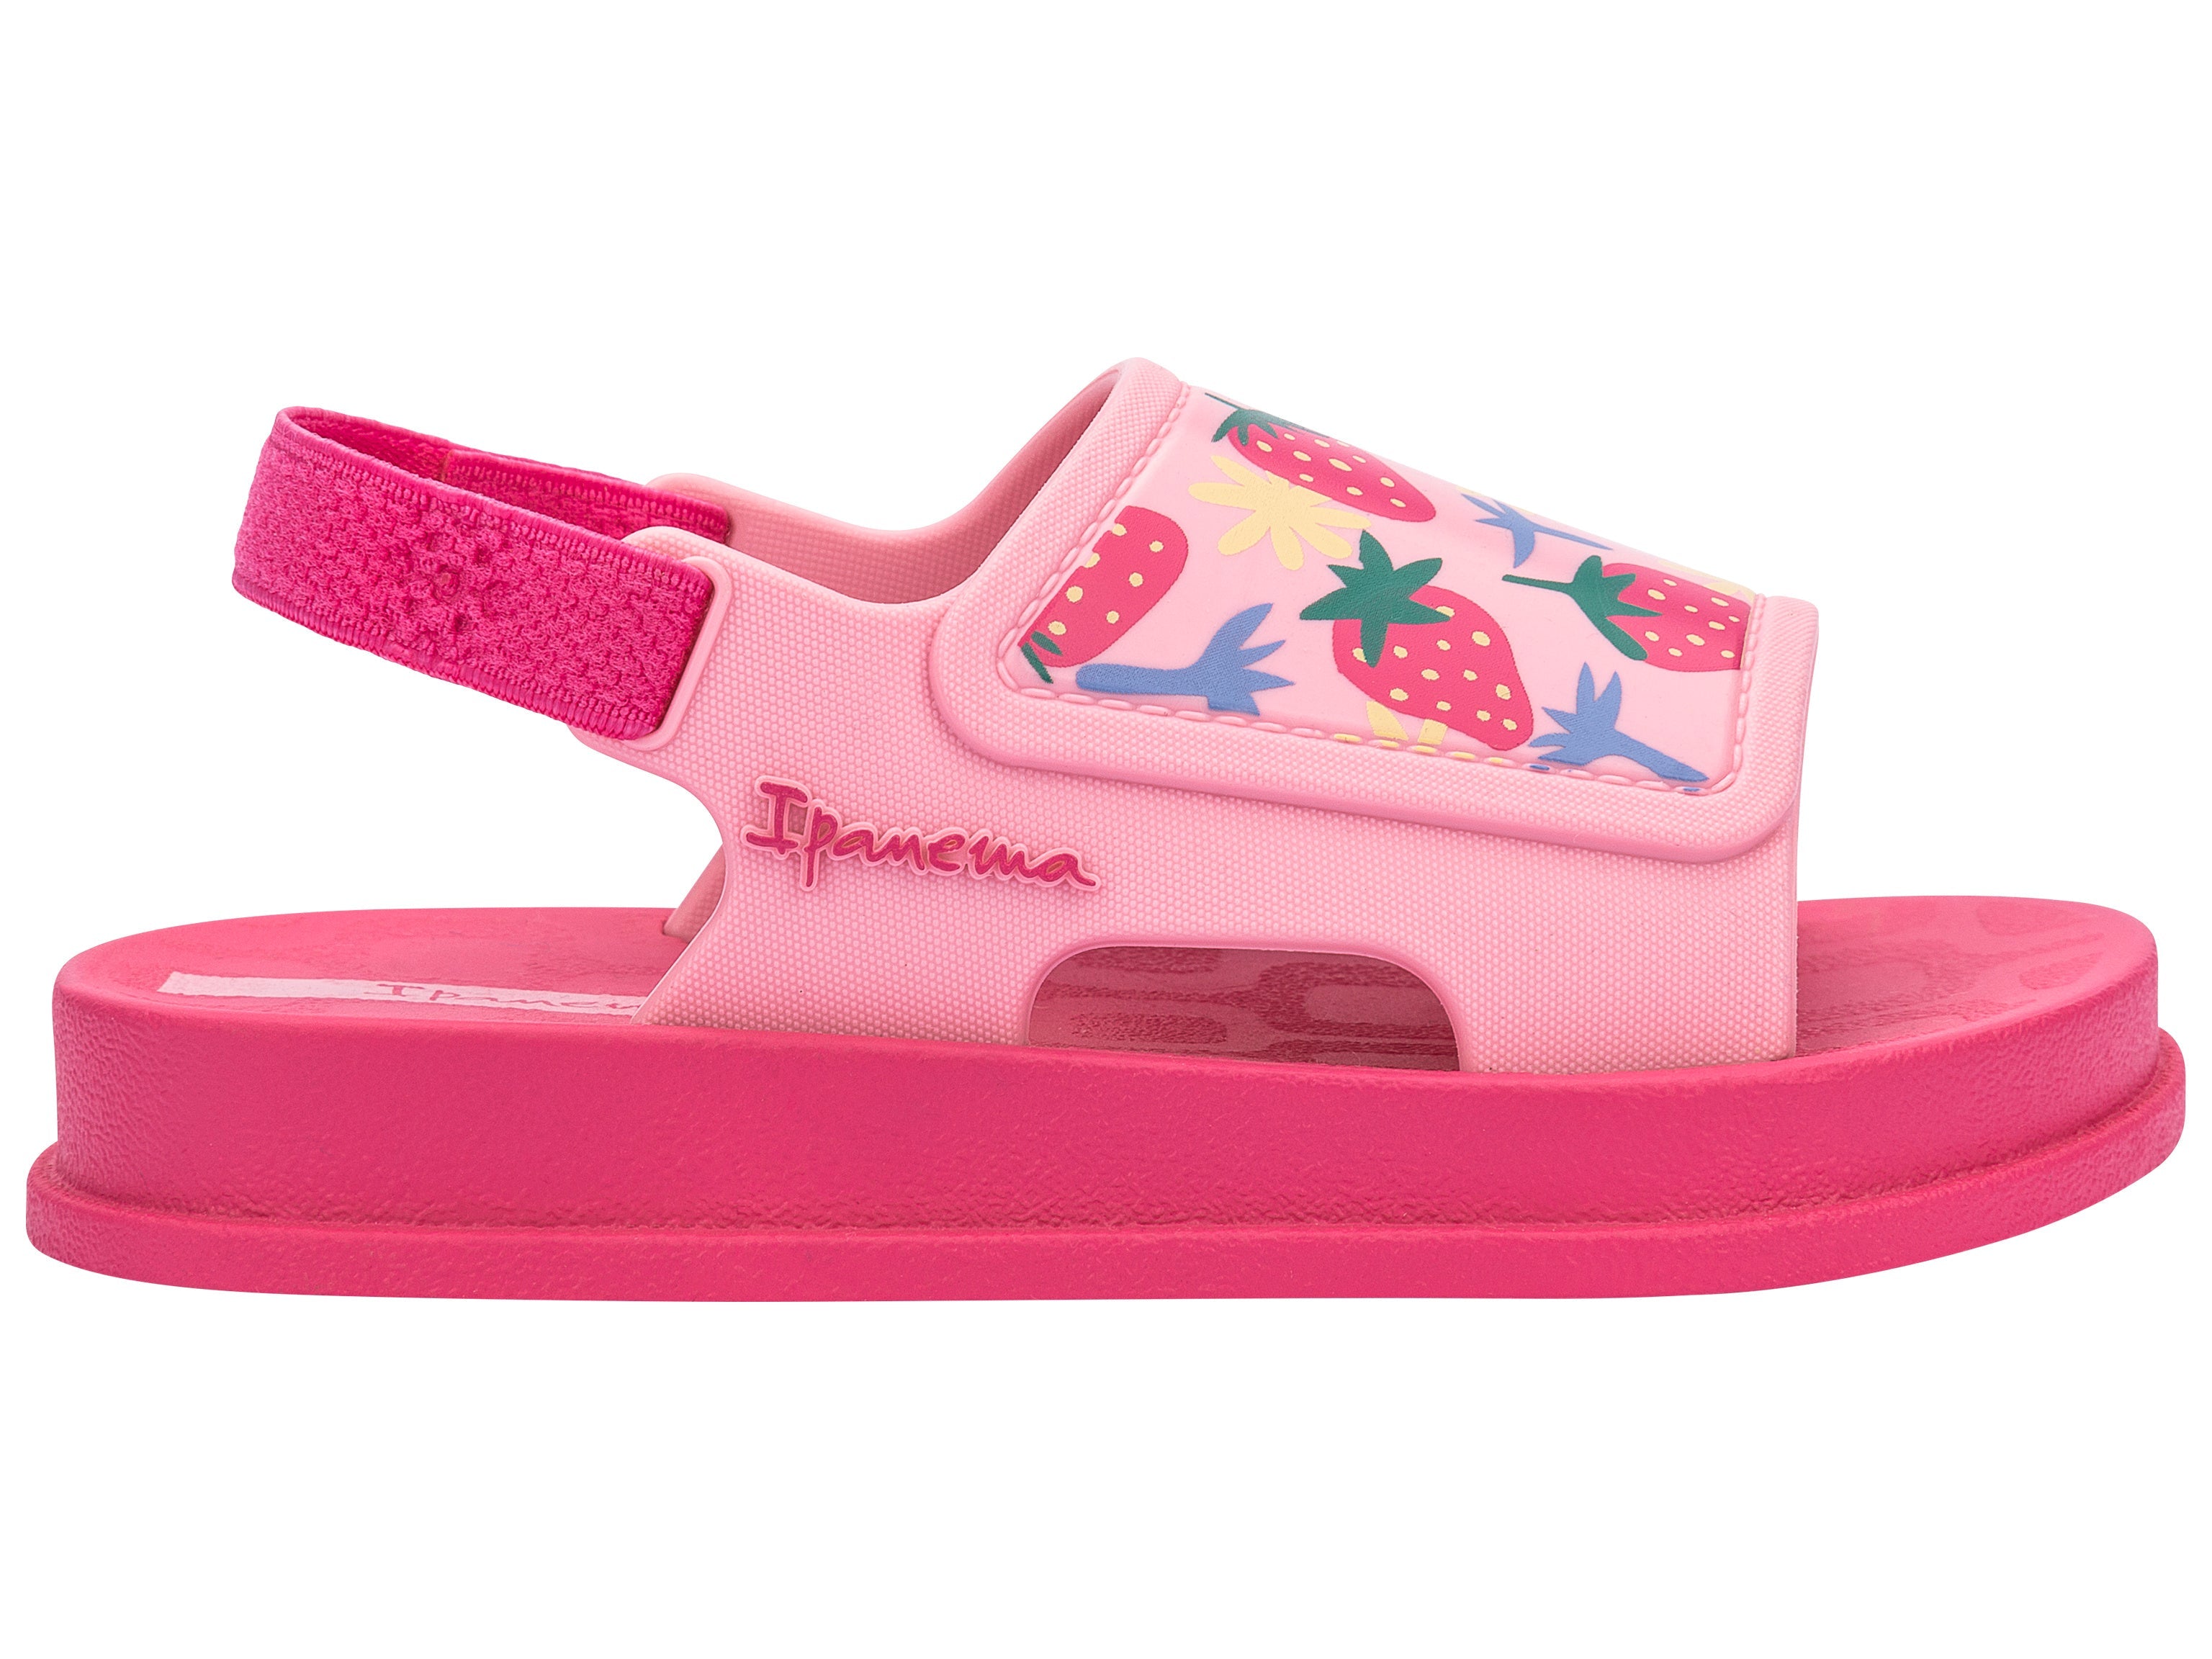 Outer side view of a pink Ipanema Soft baby sandal with fruit print on the upper.